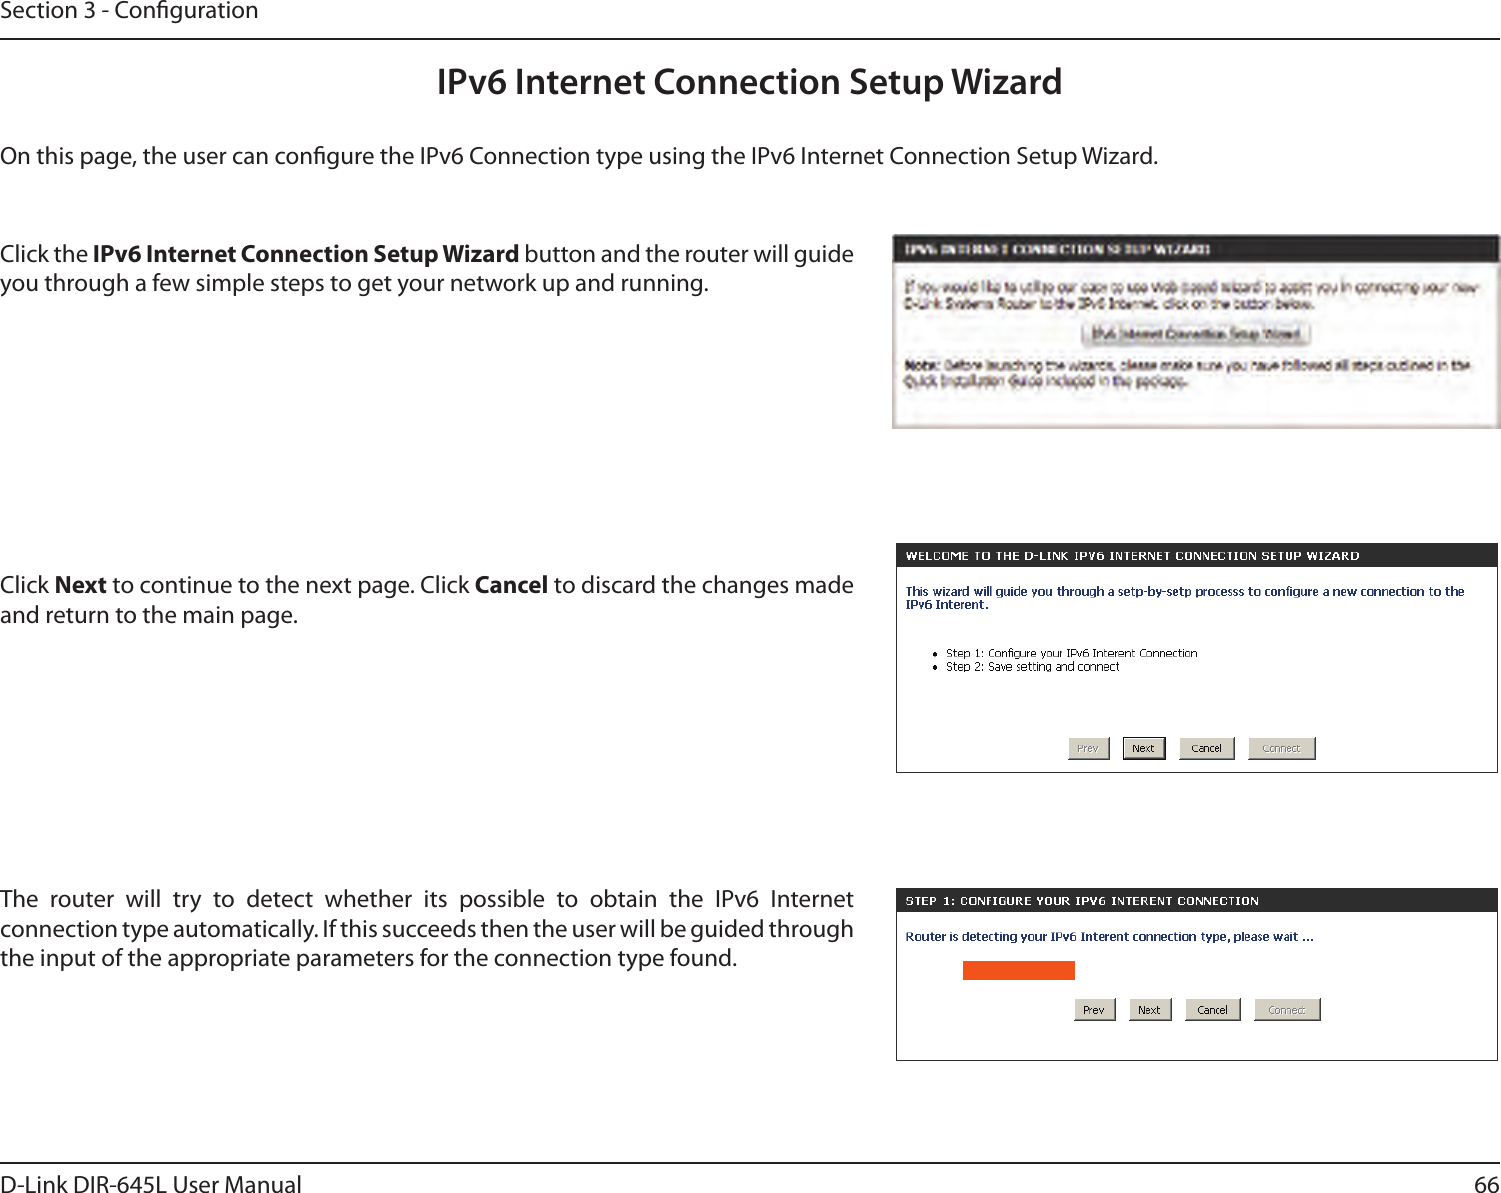 66D-Link DIR-645L User ManualSection 3 - CongurationIPv6 Internet Connection Setup WizardOn this page, the user can congure the IPv6 Connection type using the IPv6 Internet Connection Setup Wizard.Click the IPv6 Internet Connection Setup Wizard button and the router will guide you through a few simple steps to get your network up and running.Click Next to continue to the next page. Click Cancel to discard the changes made and return to the main page.The  router  will  try  to  detect  whether  its  possible  to  obtain  the  IPv6  Internet connection type automatically. If this succeeds then the user will be guided through the input of the appropriate parameters for the connection type found.